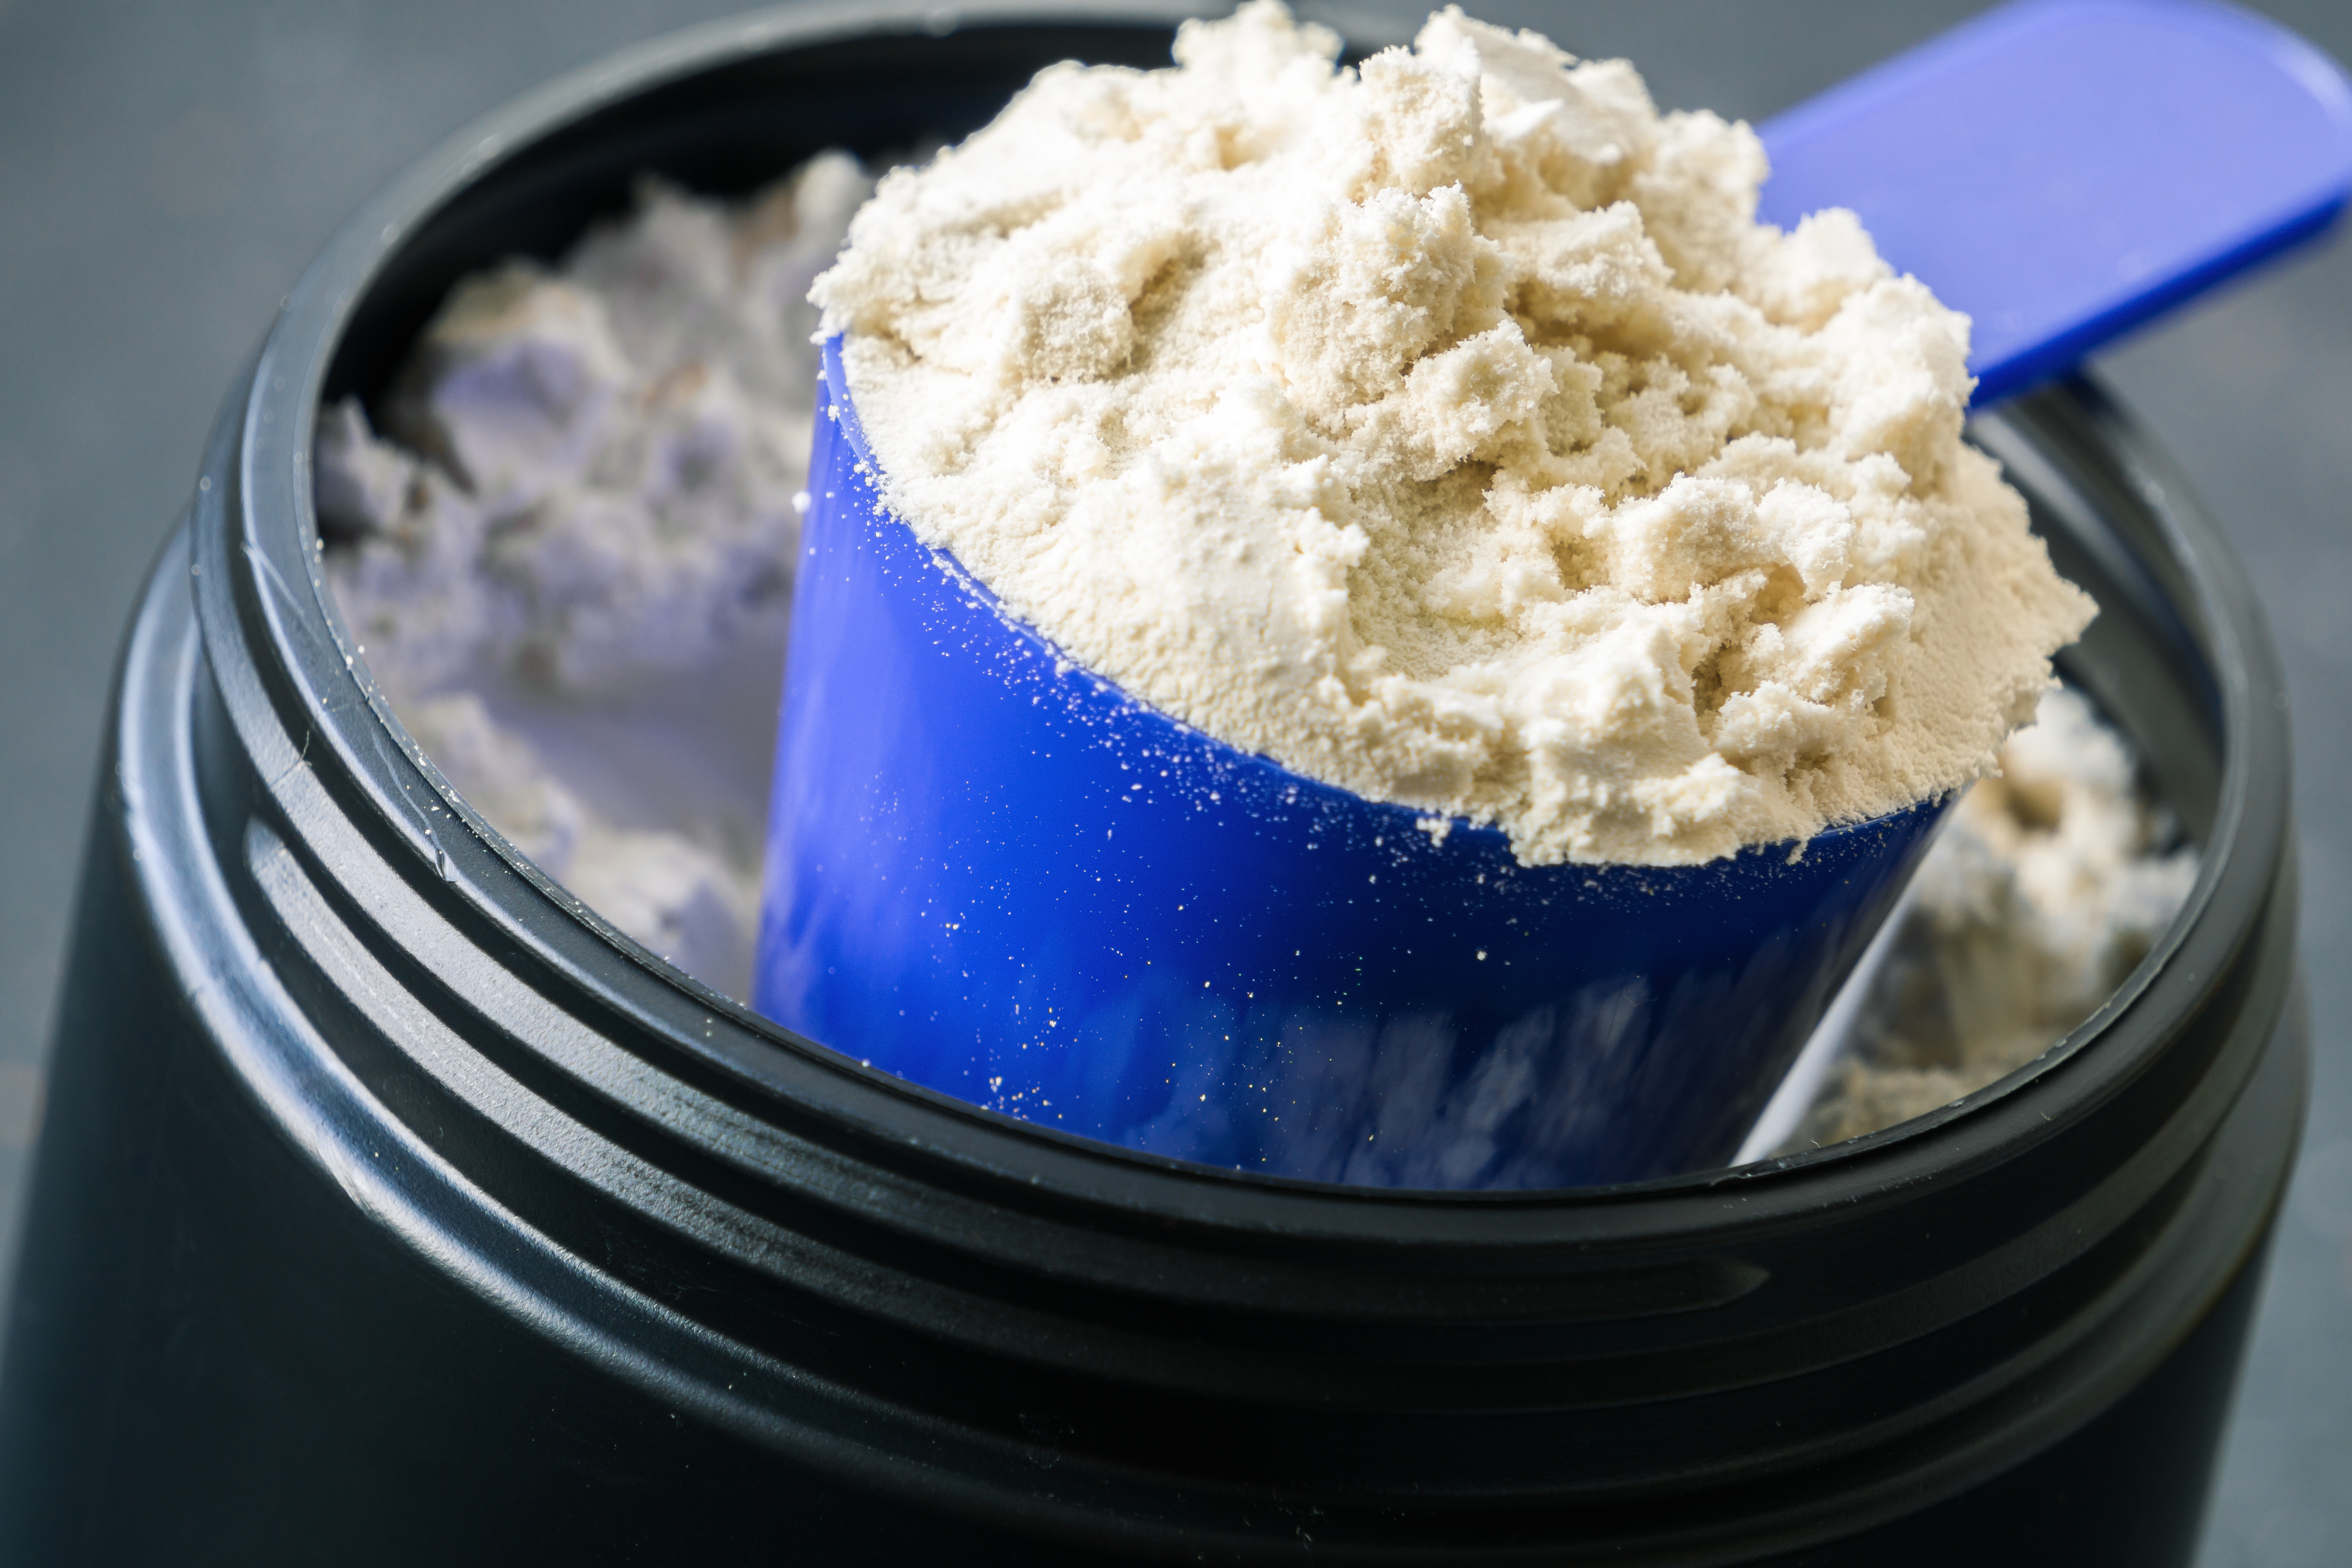 Everything You Need to Know for Proper Protein Powder Storage